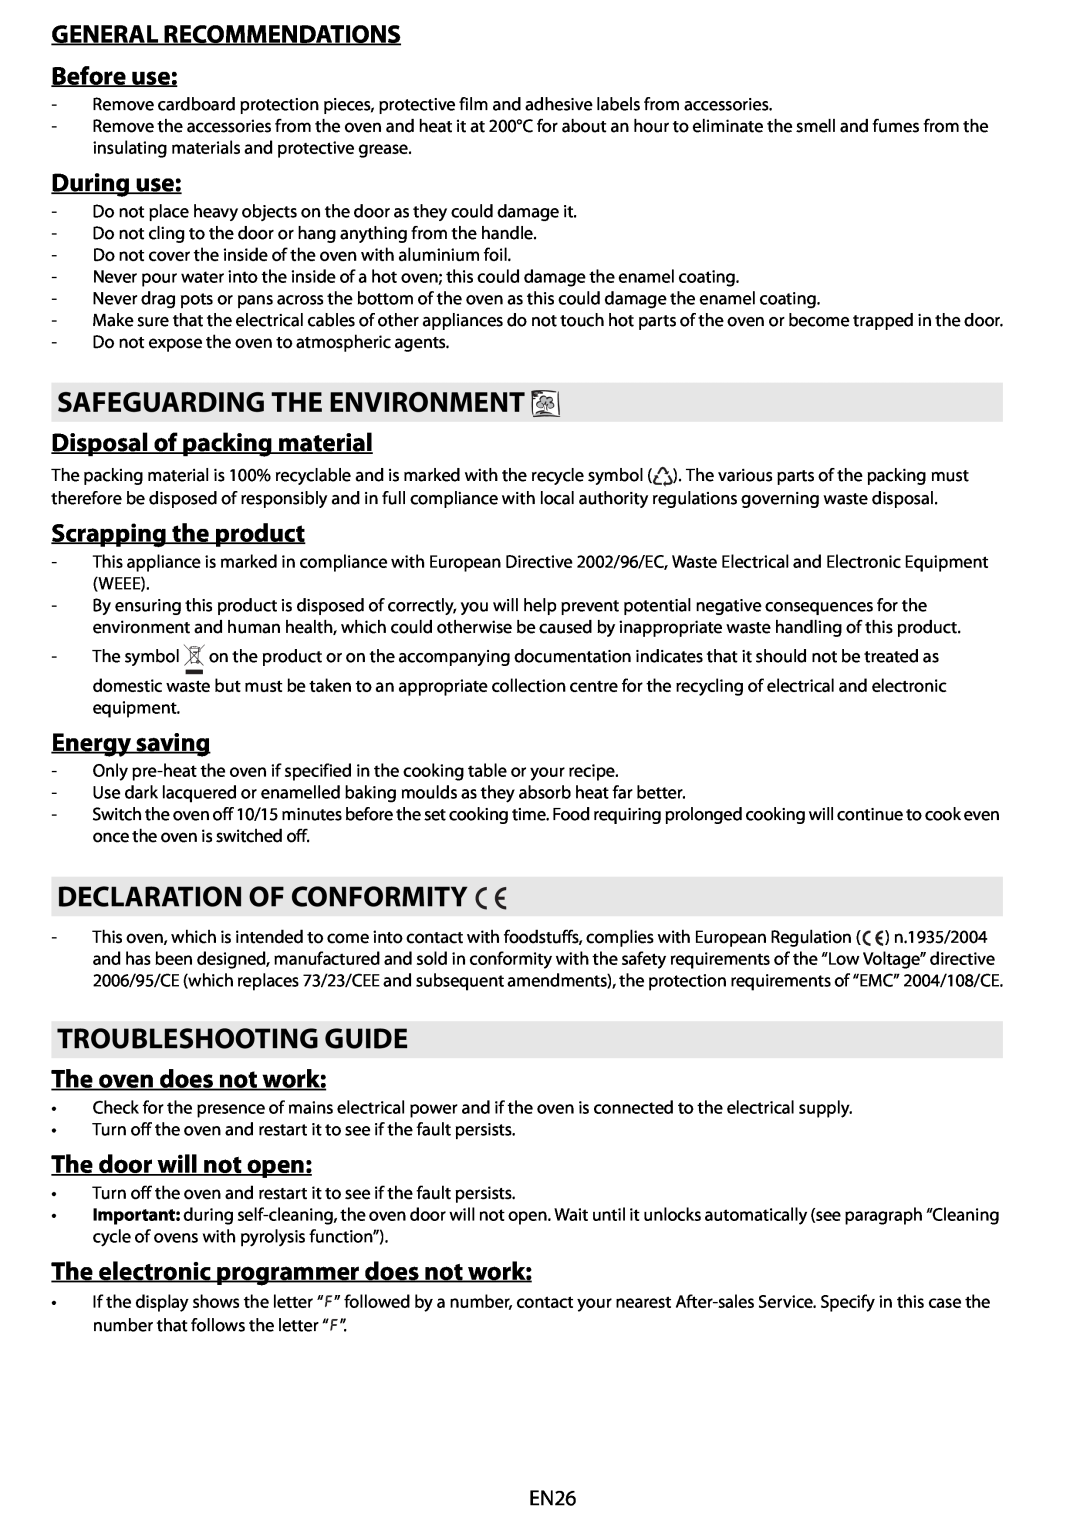 Whirlpool BMVE 8200 Safeguarding The Environment, Declaration Of Conformity, Troubleshooting Guide, During use 